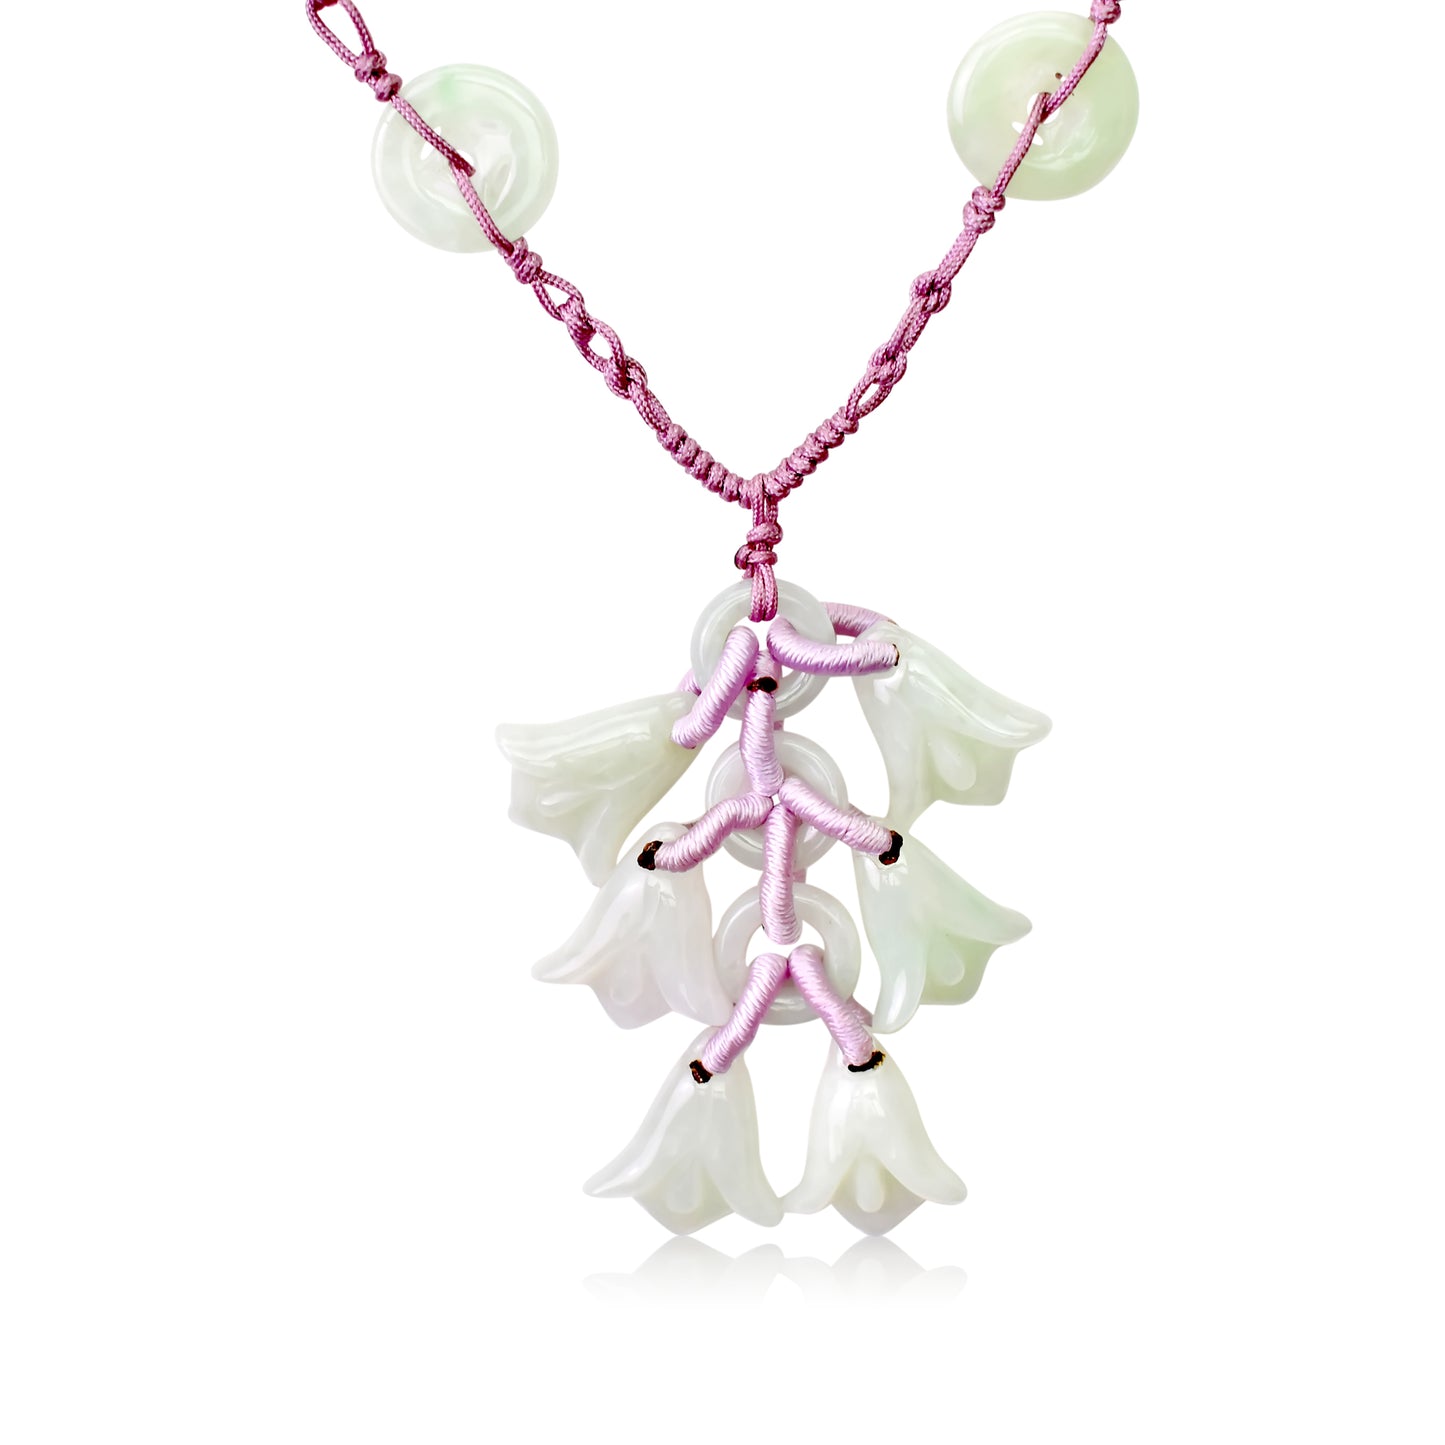 Beautiful and Dainty Bellflower Dangles Handmade Jade Necklace Pendant with Lavender Cord